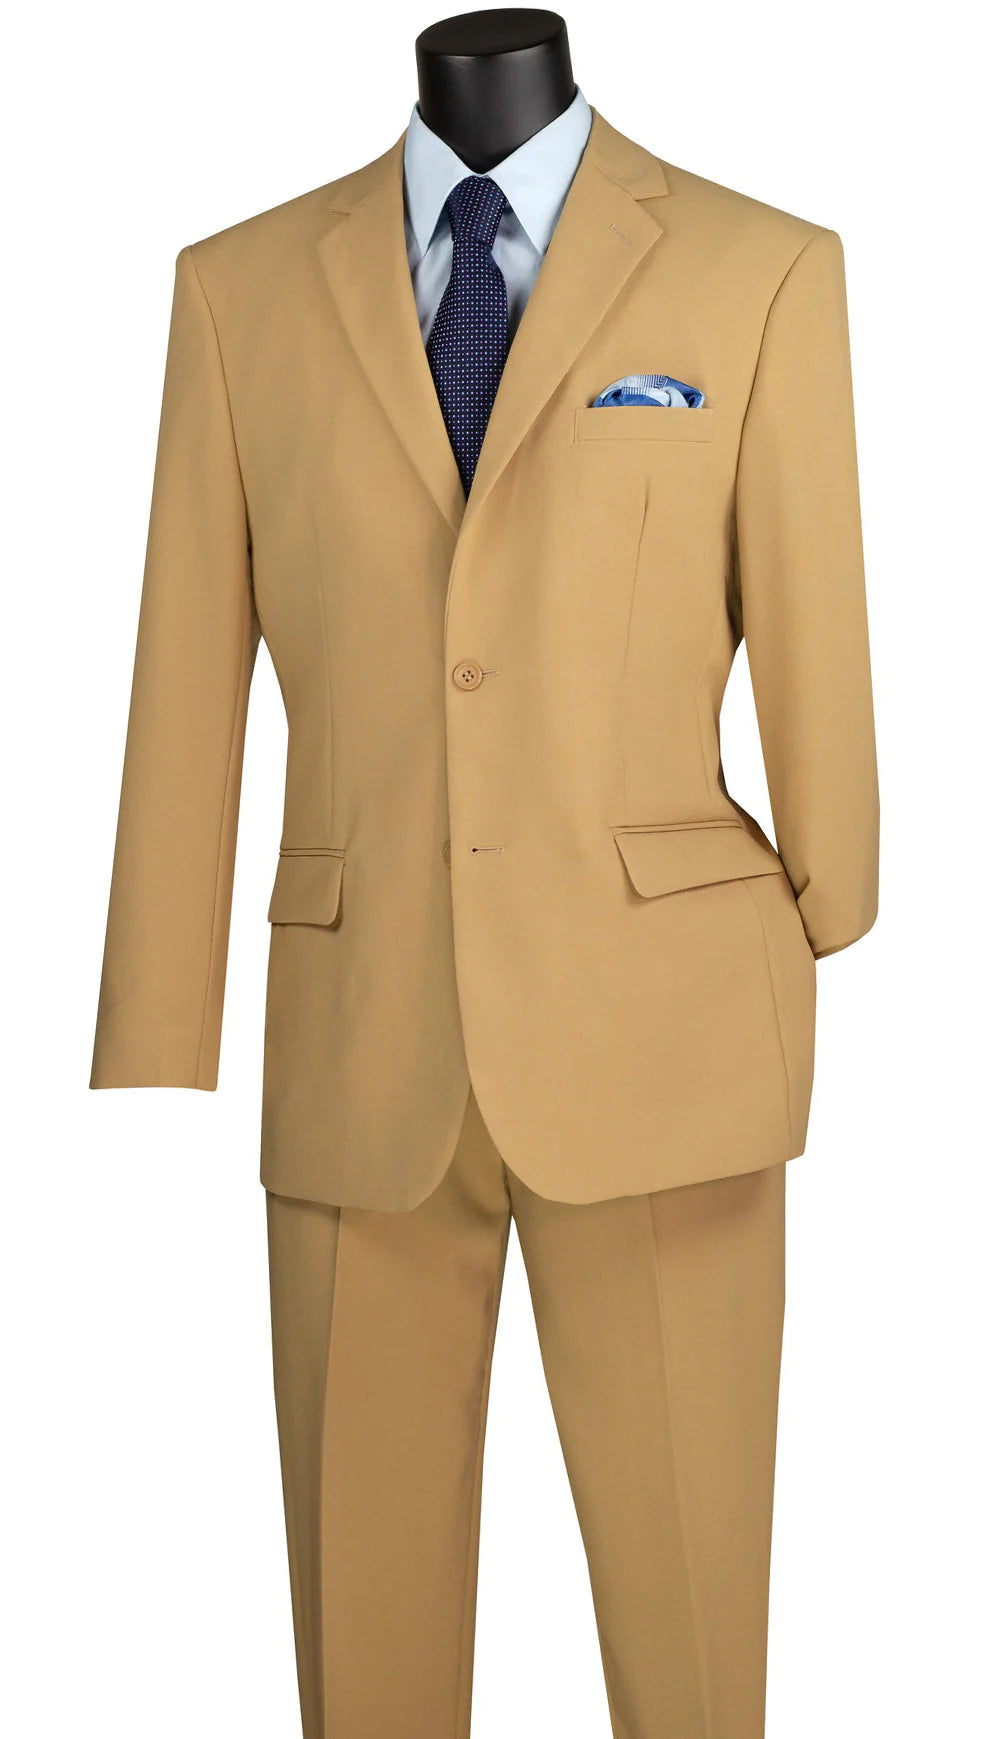 Regular Fit Single Breasted Suit  Khaki & Charcoal  Colors